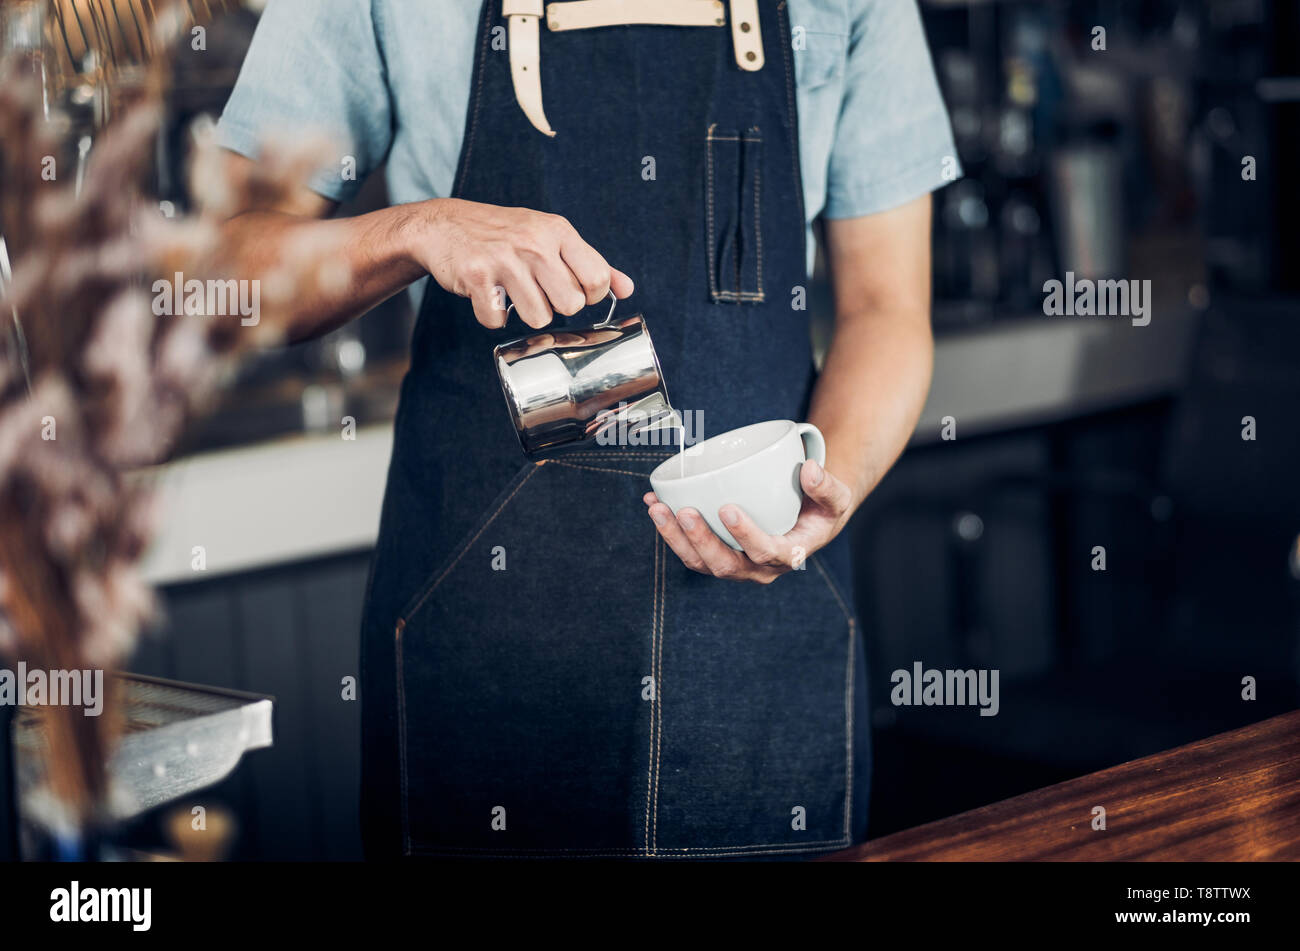 Man barista pour milk into hot coffee cup at counter bar in front of machine in cafe restaurant,Food business owner concept. Stock Photo